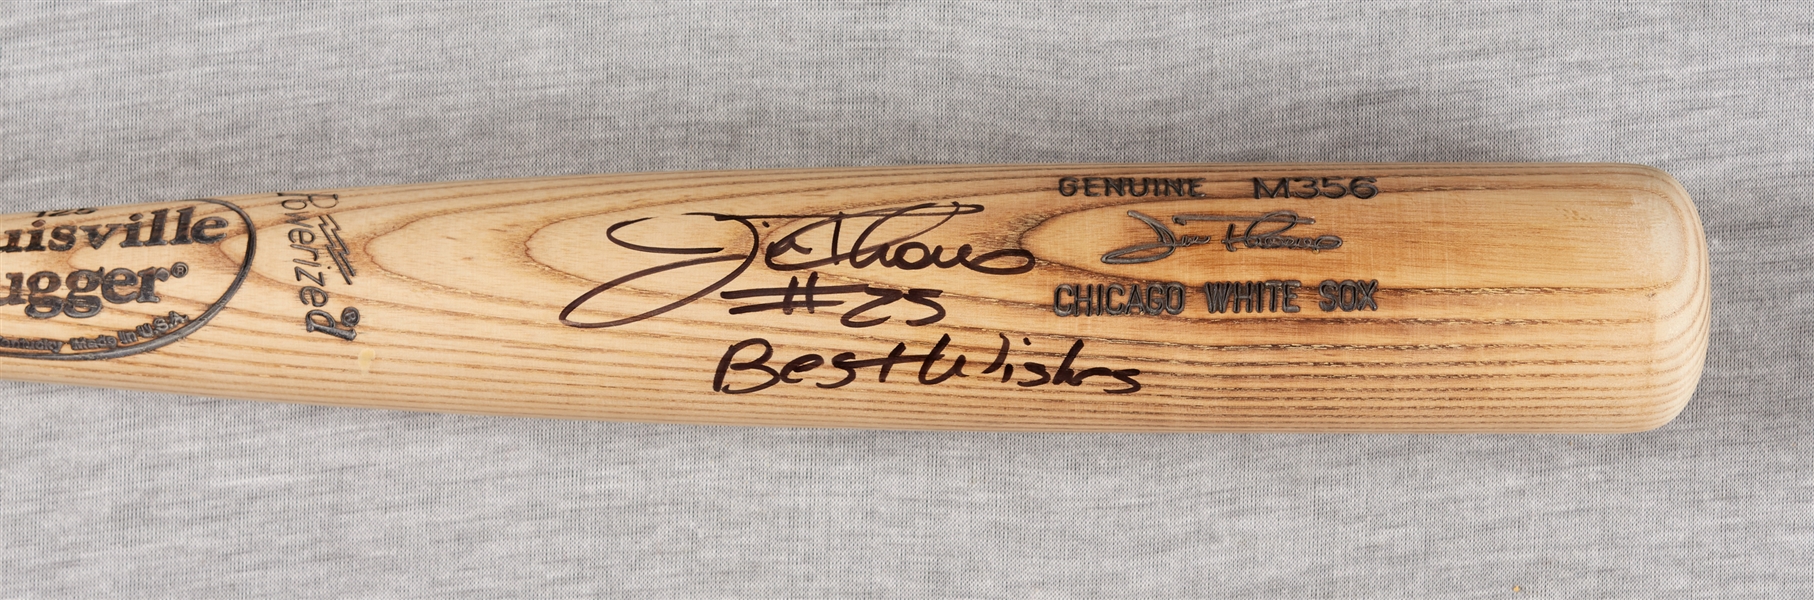 Jim Thome Game-Issued & Signed Louisville Slugger Bat (BAS)